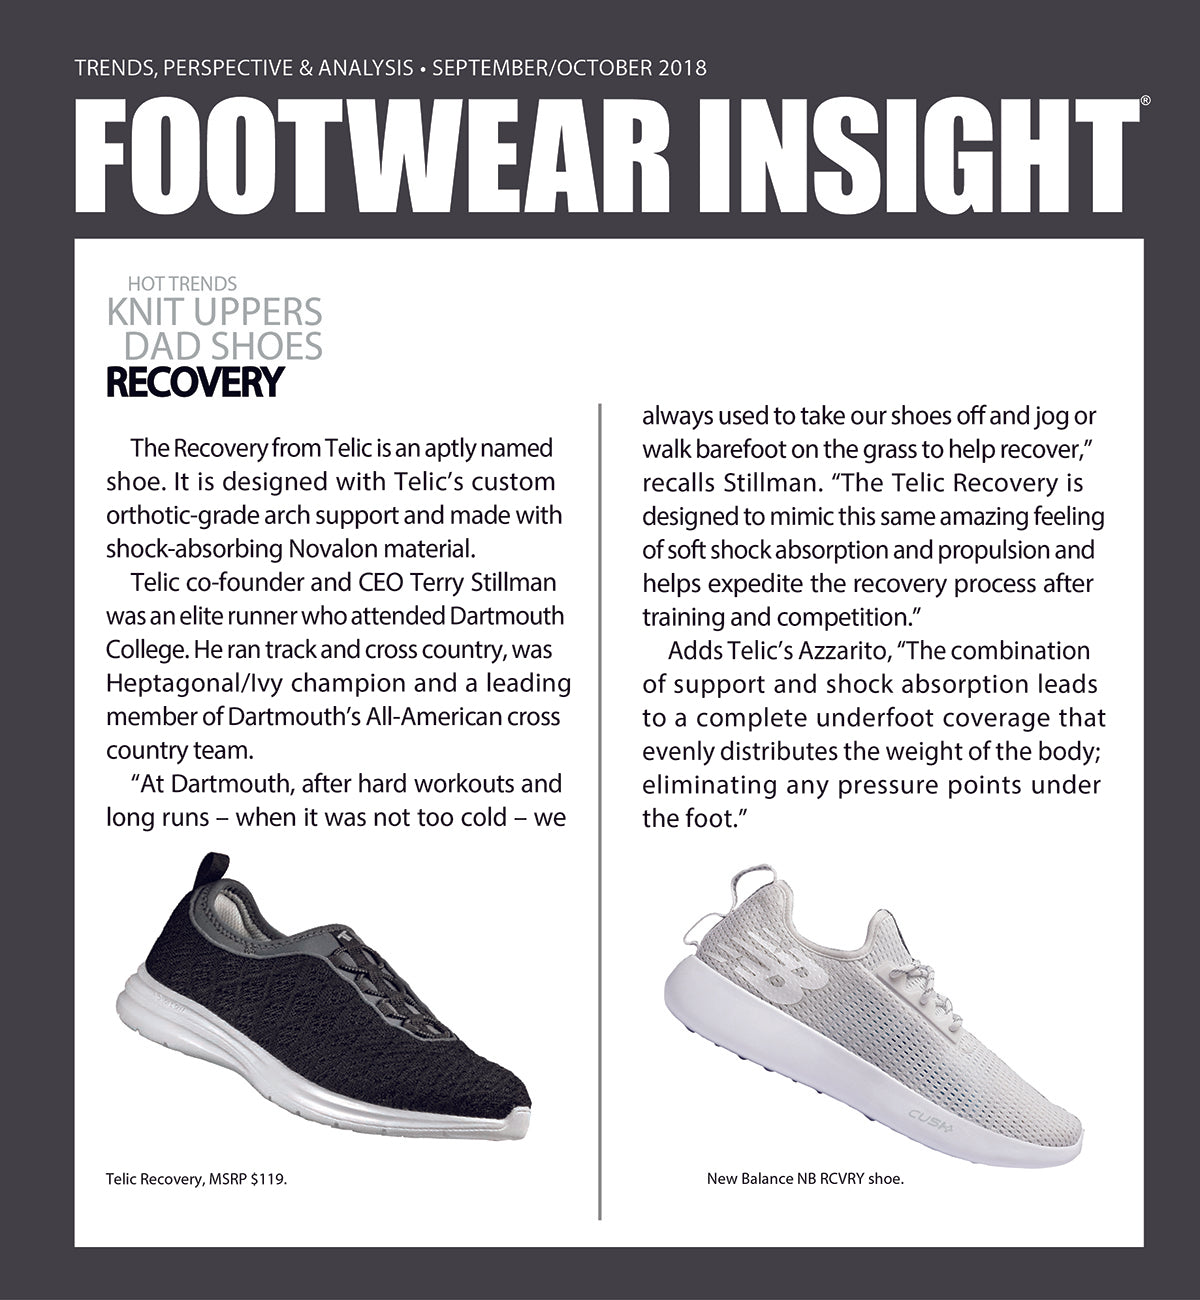 TELIC RECOVERY FEATURED IN FOOTWEAR INSIGHT - SEPTEMBER/OCTOBER 2018